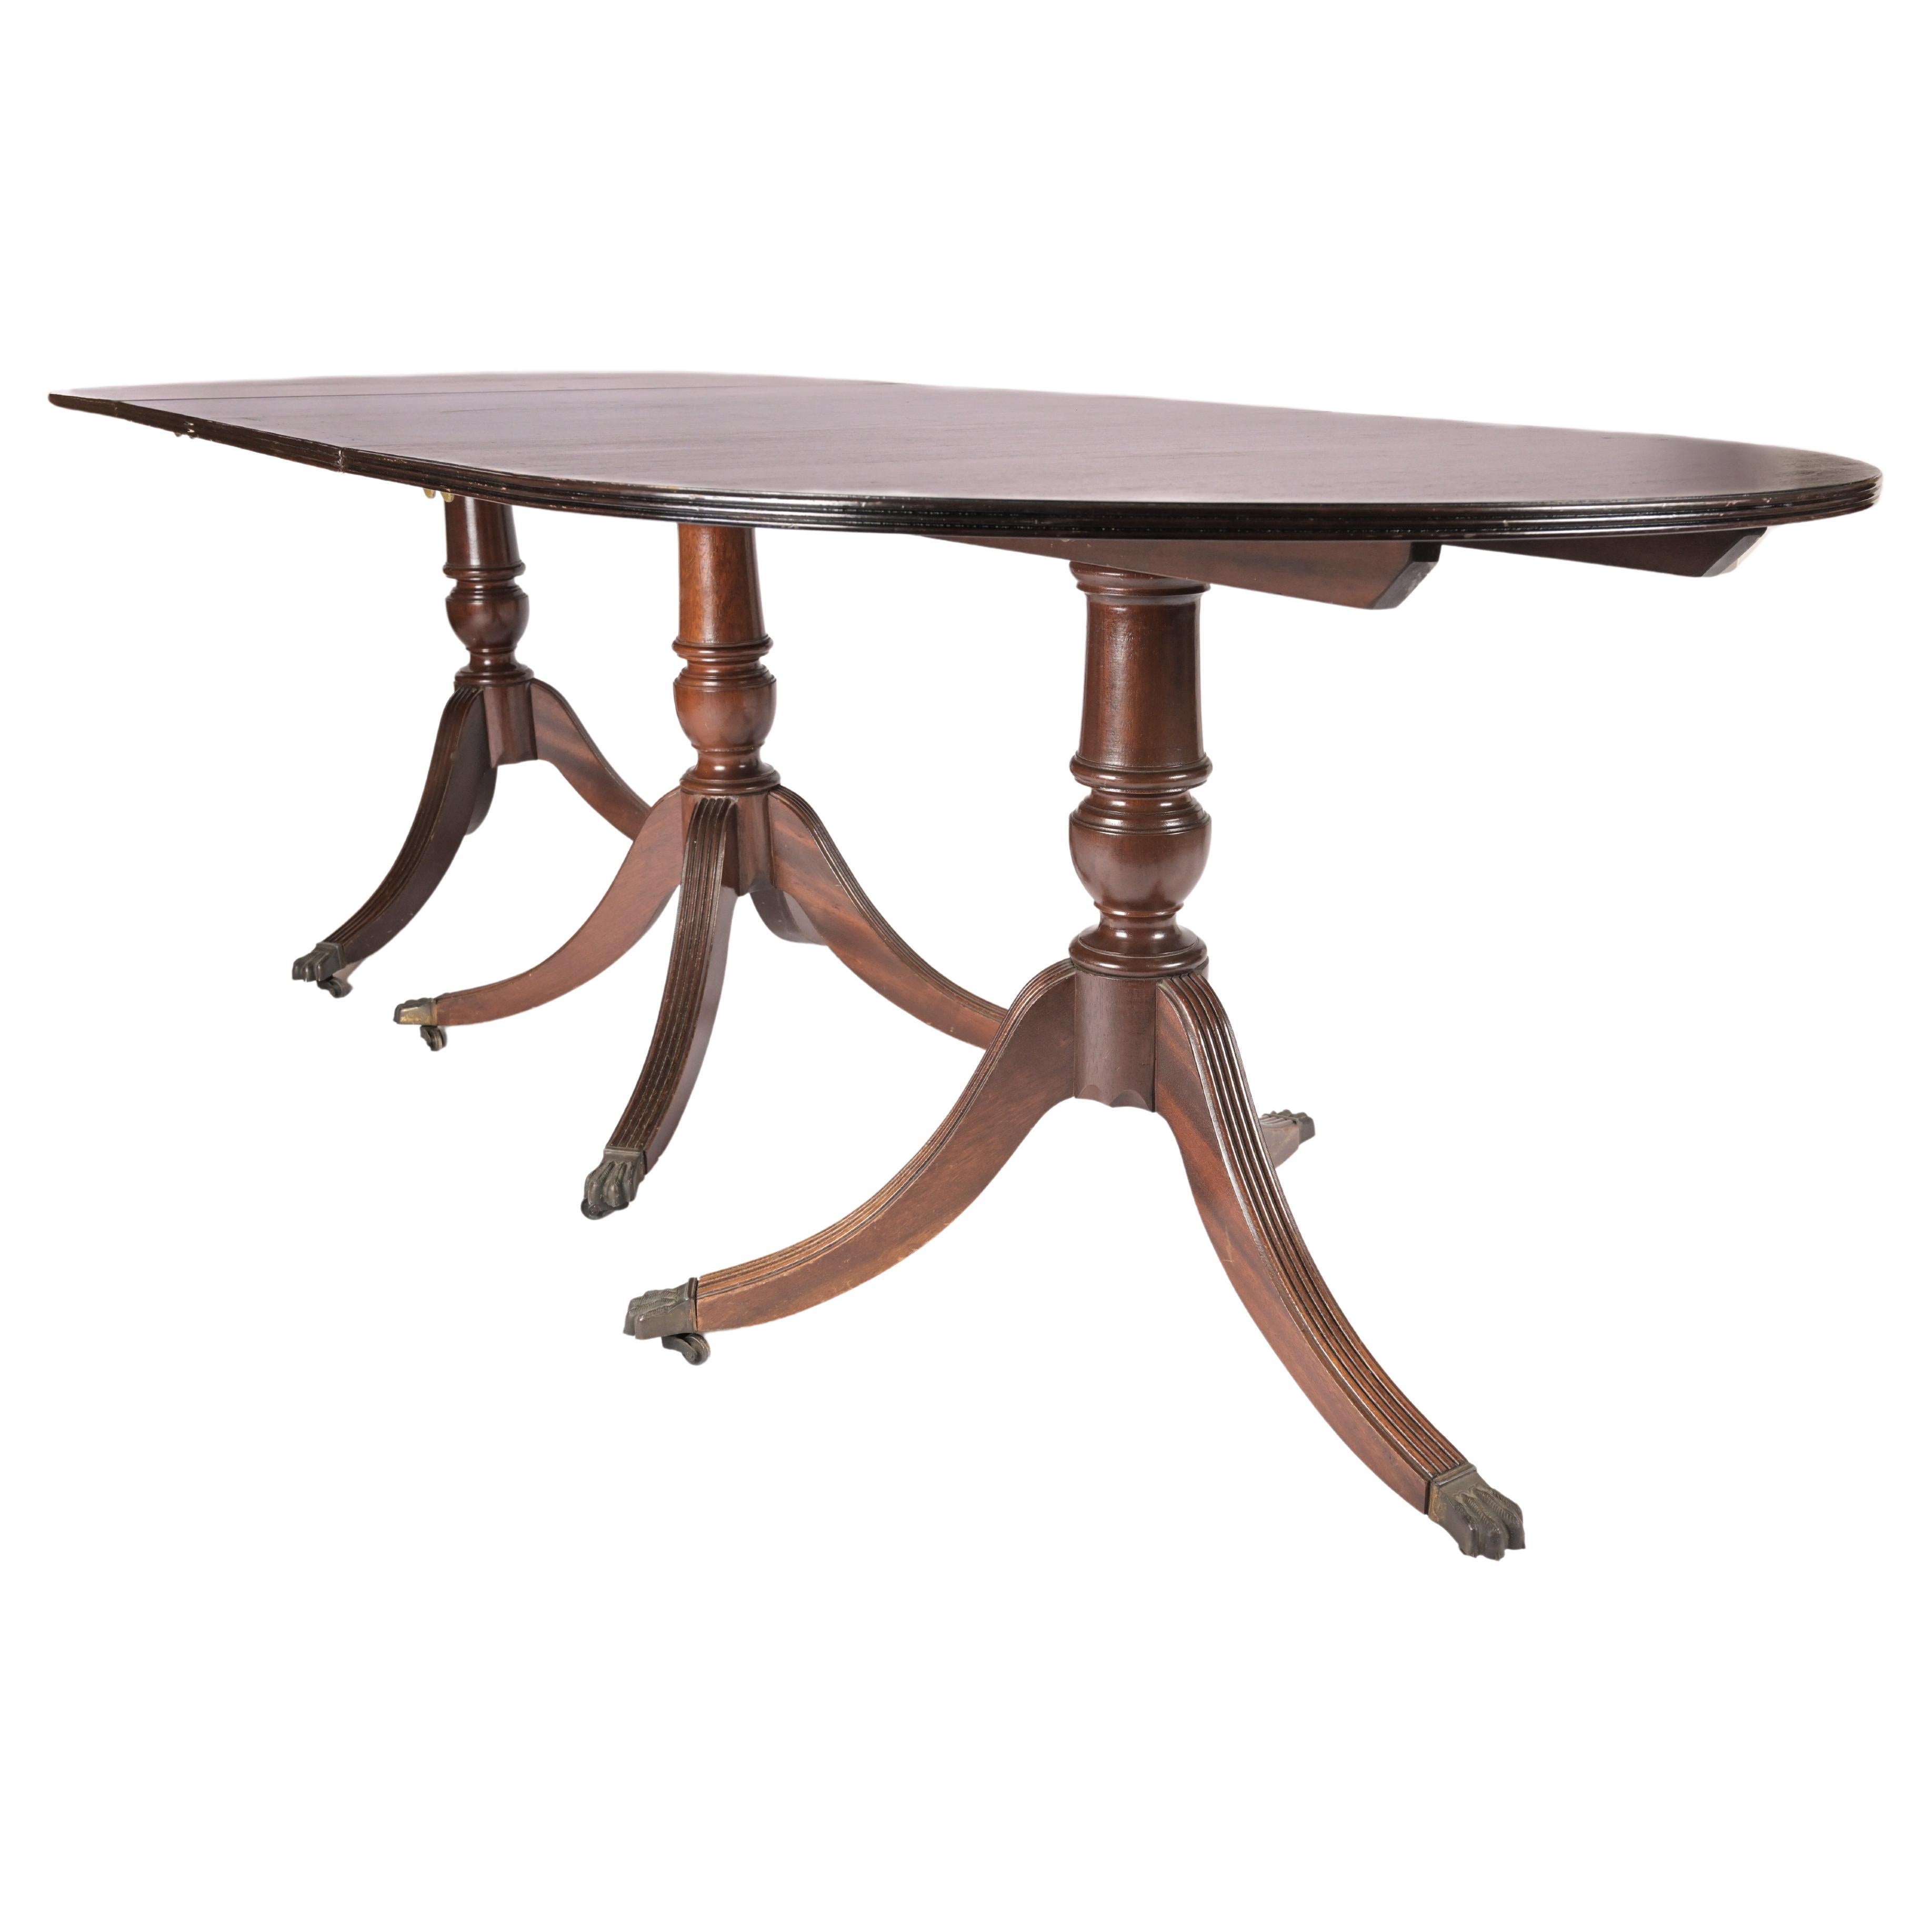 An early 20th century English Sheraton Style Mahogany pedestal base dining table with 3 pedestals having splayed legs with brass lions paw feet and casters. The top of each of the three sections hinges on the pedestal base for storage with two